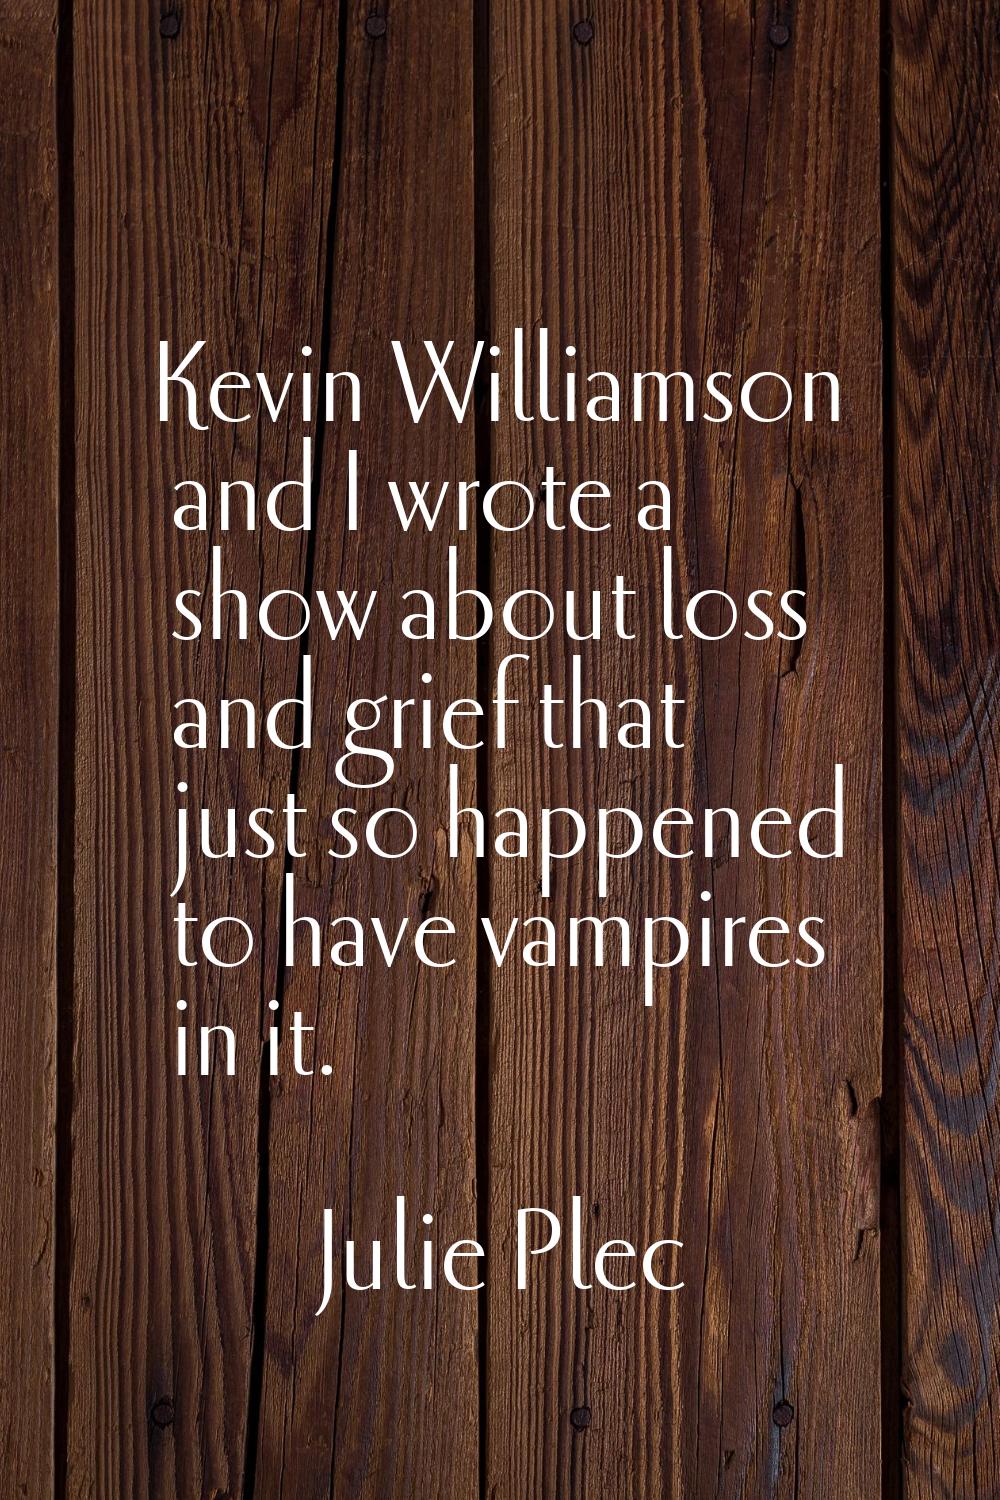 Kevin Williamson and I wrote a show about loss and grief that just so happened to have vampires in 